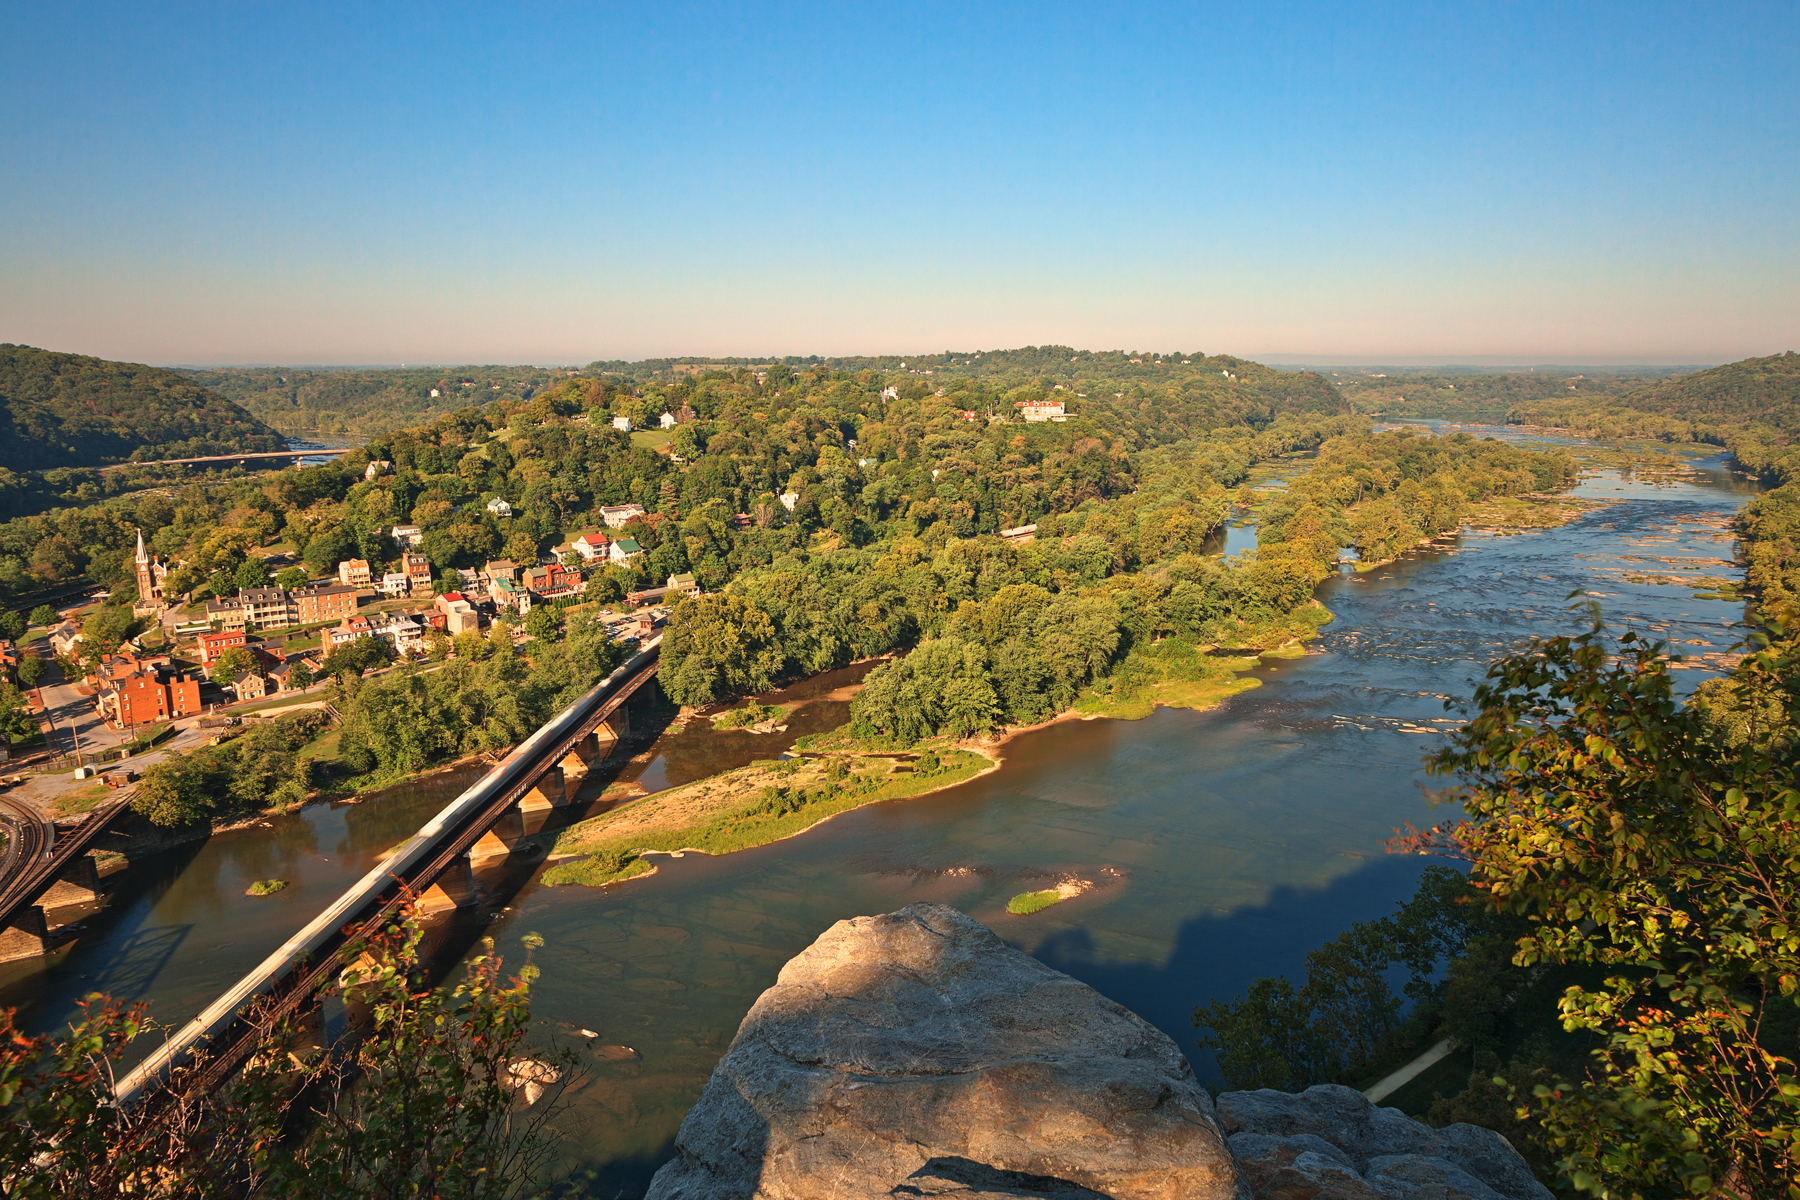 Harpers ferry overlook - hdr photo